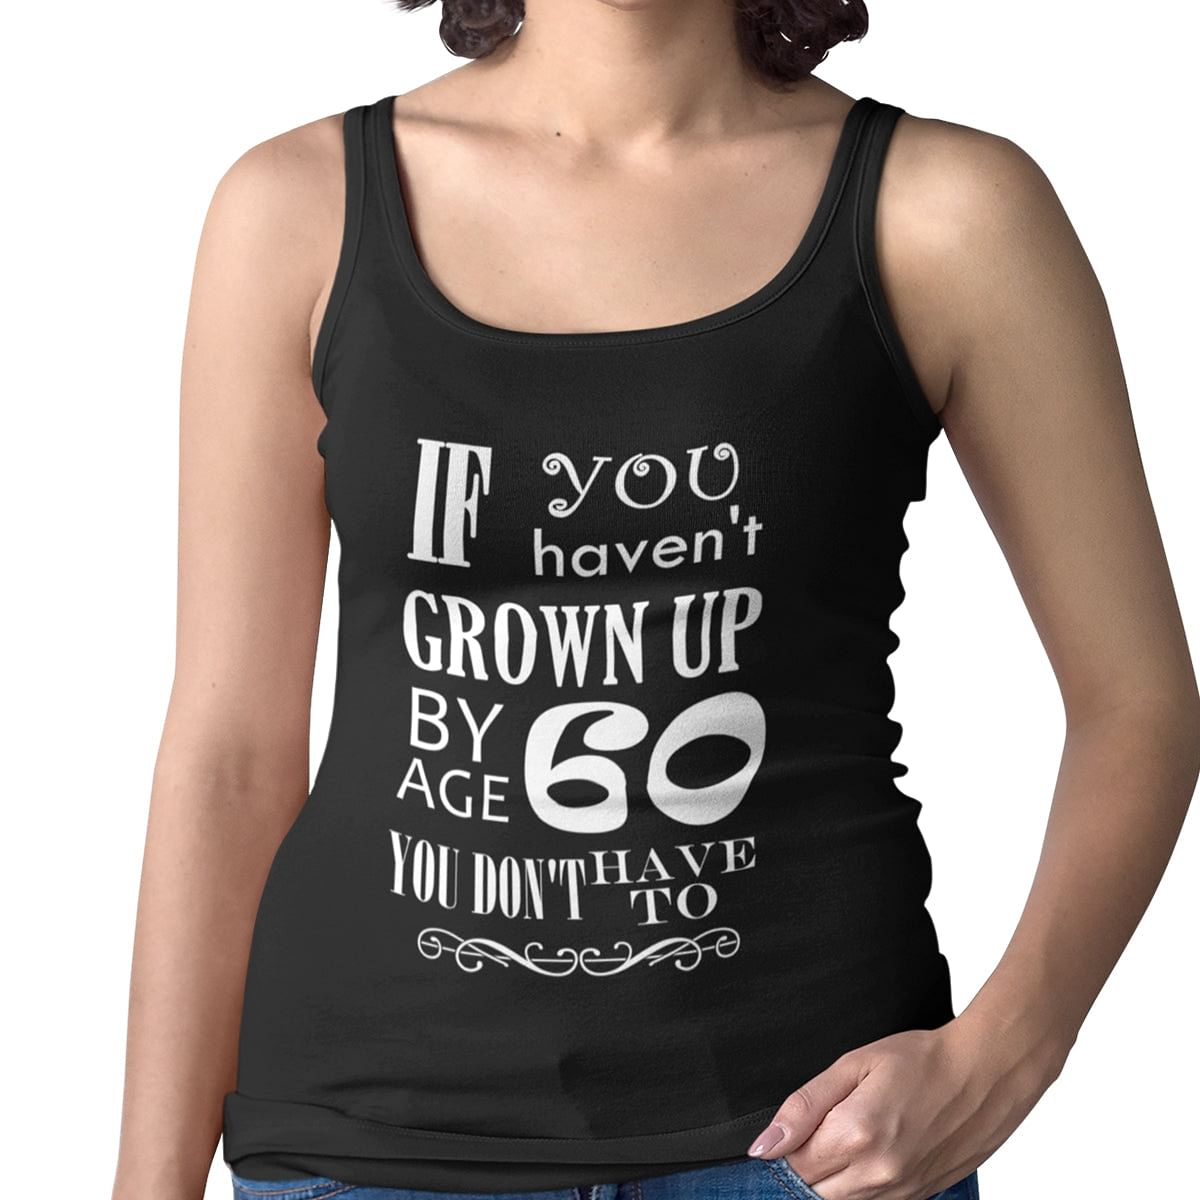 You Don't Have To Grow Up Tank TopClassically Styled